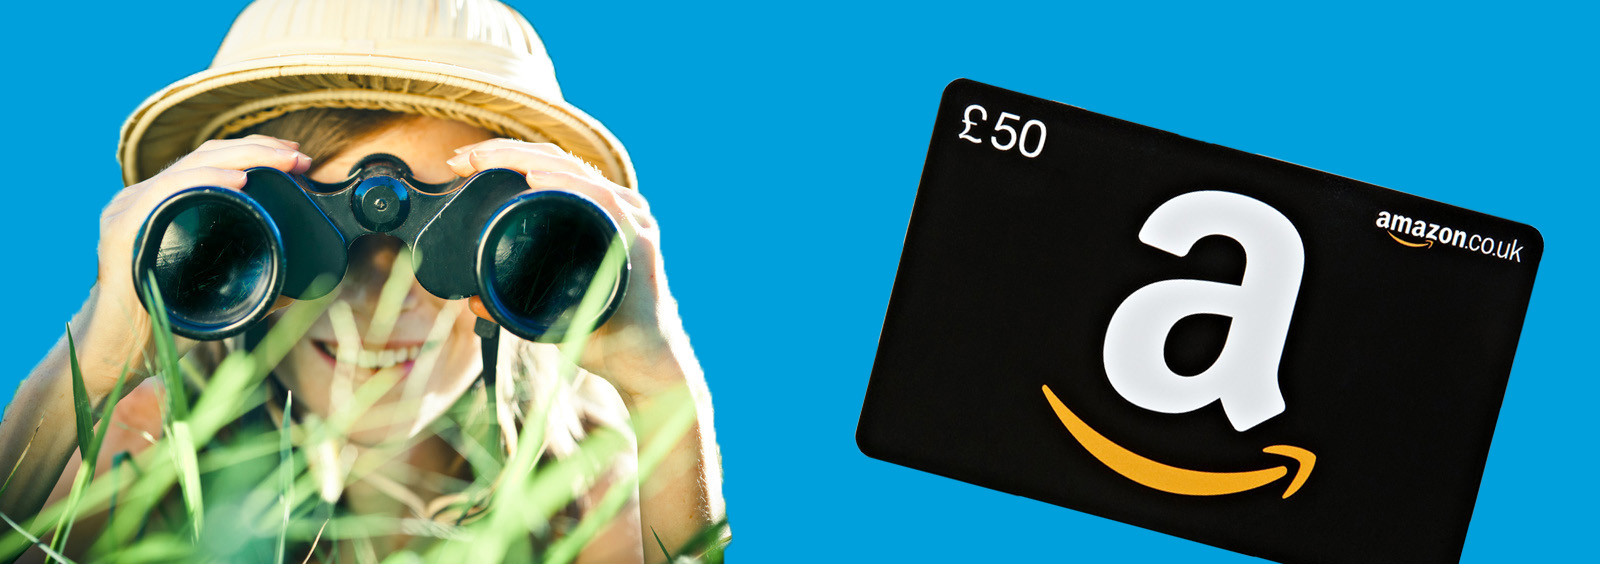 Be awarded an Amazon voucher on a successful lead sent to us